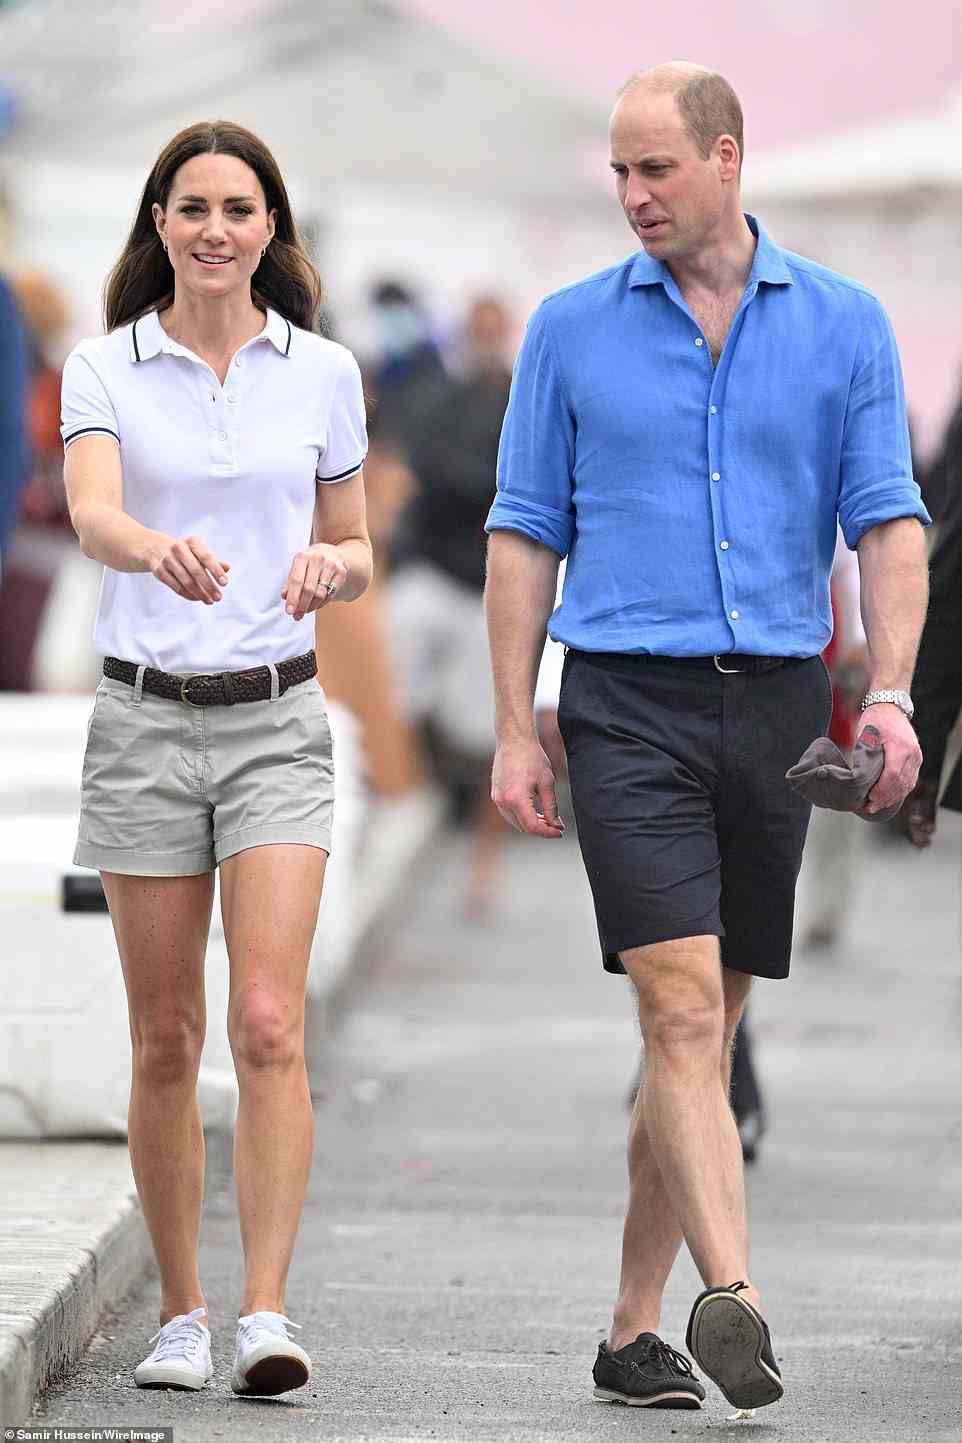 Pictured: The Duke and Duchess of Cambridge on their way to attend The Bahamas Platinum Jubilee Sailing Regatta at Montagu Bay